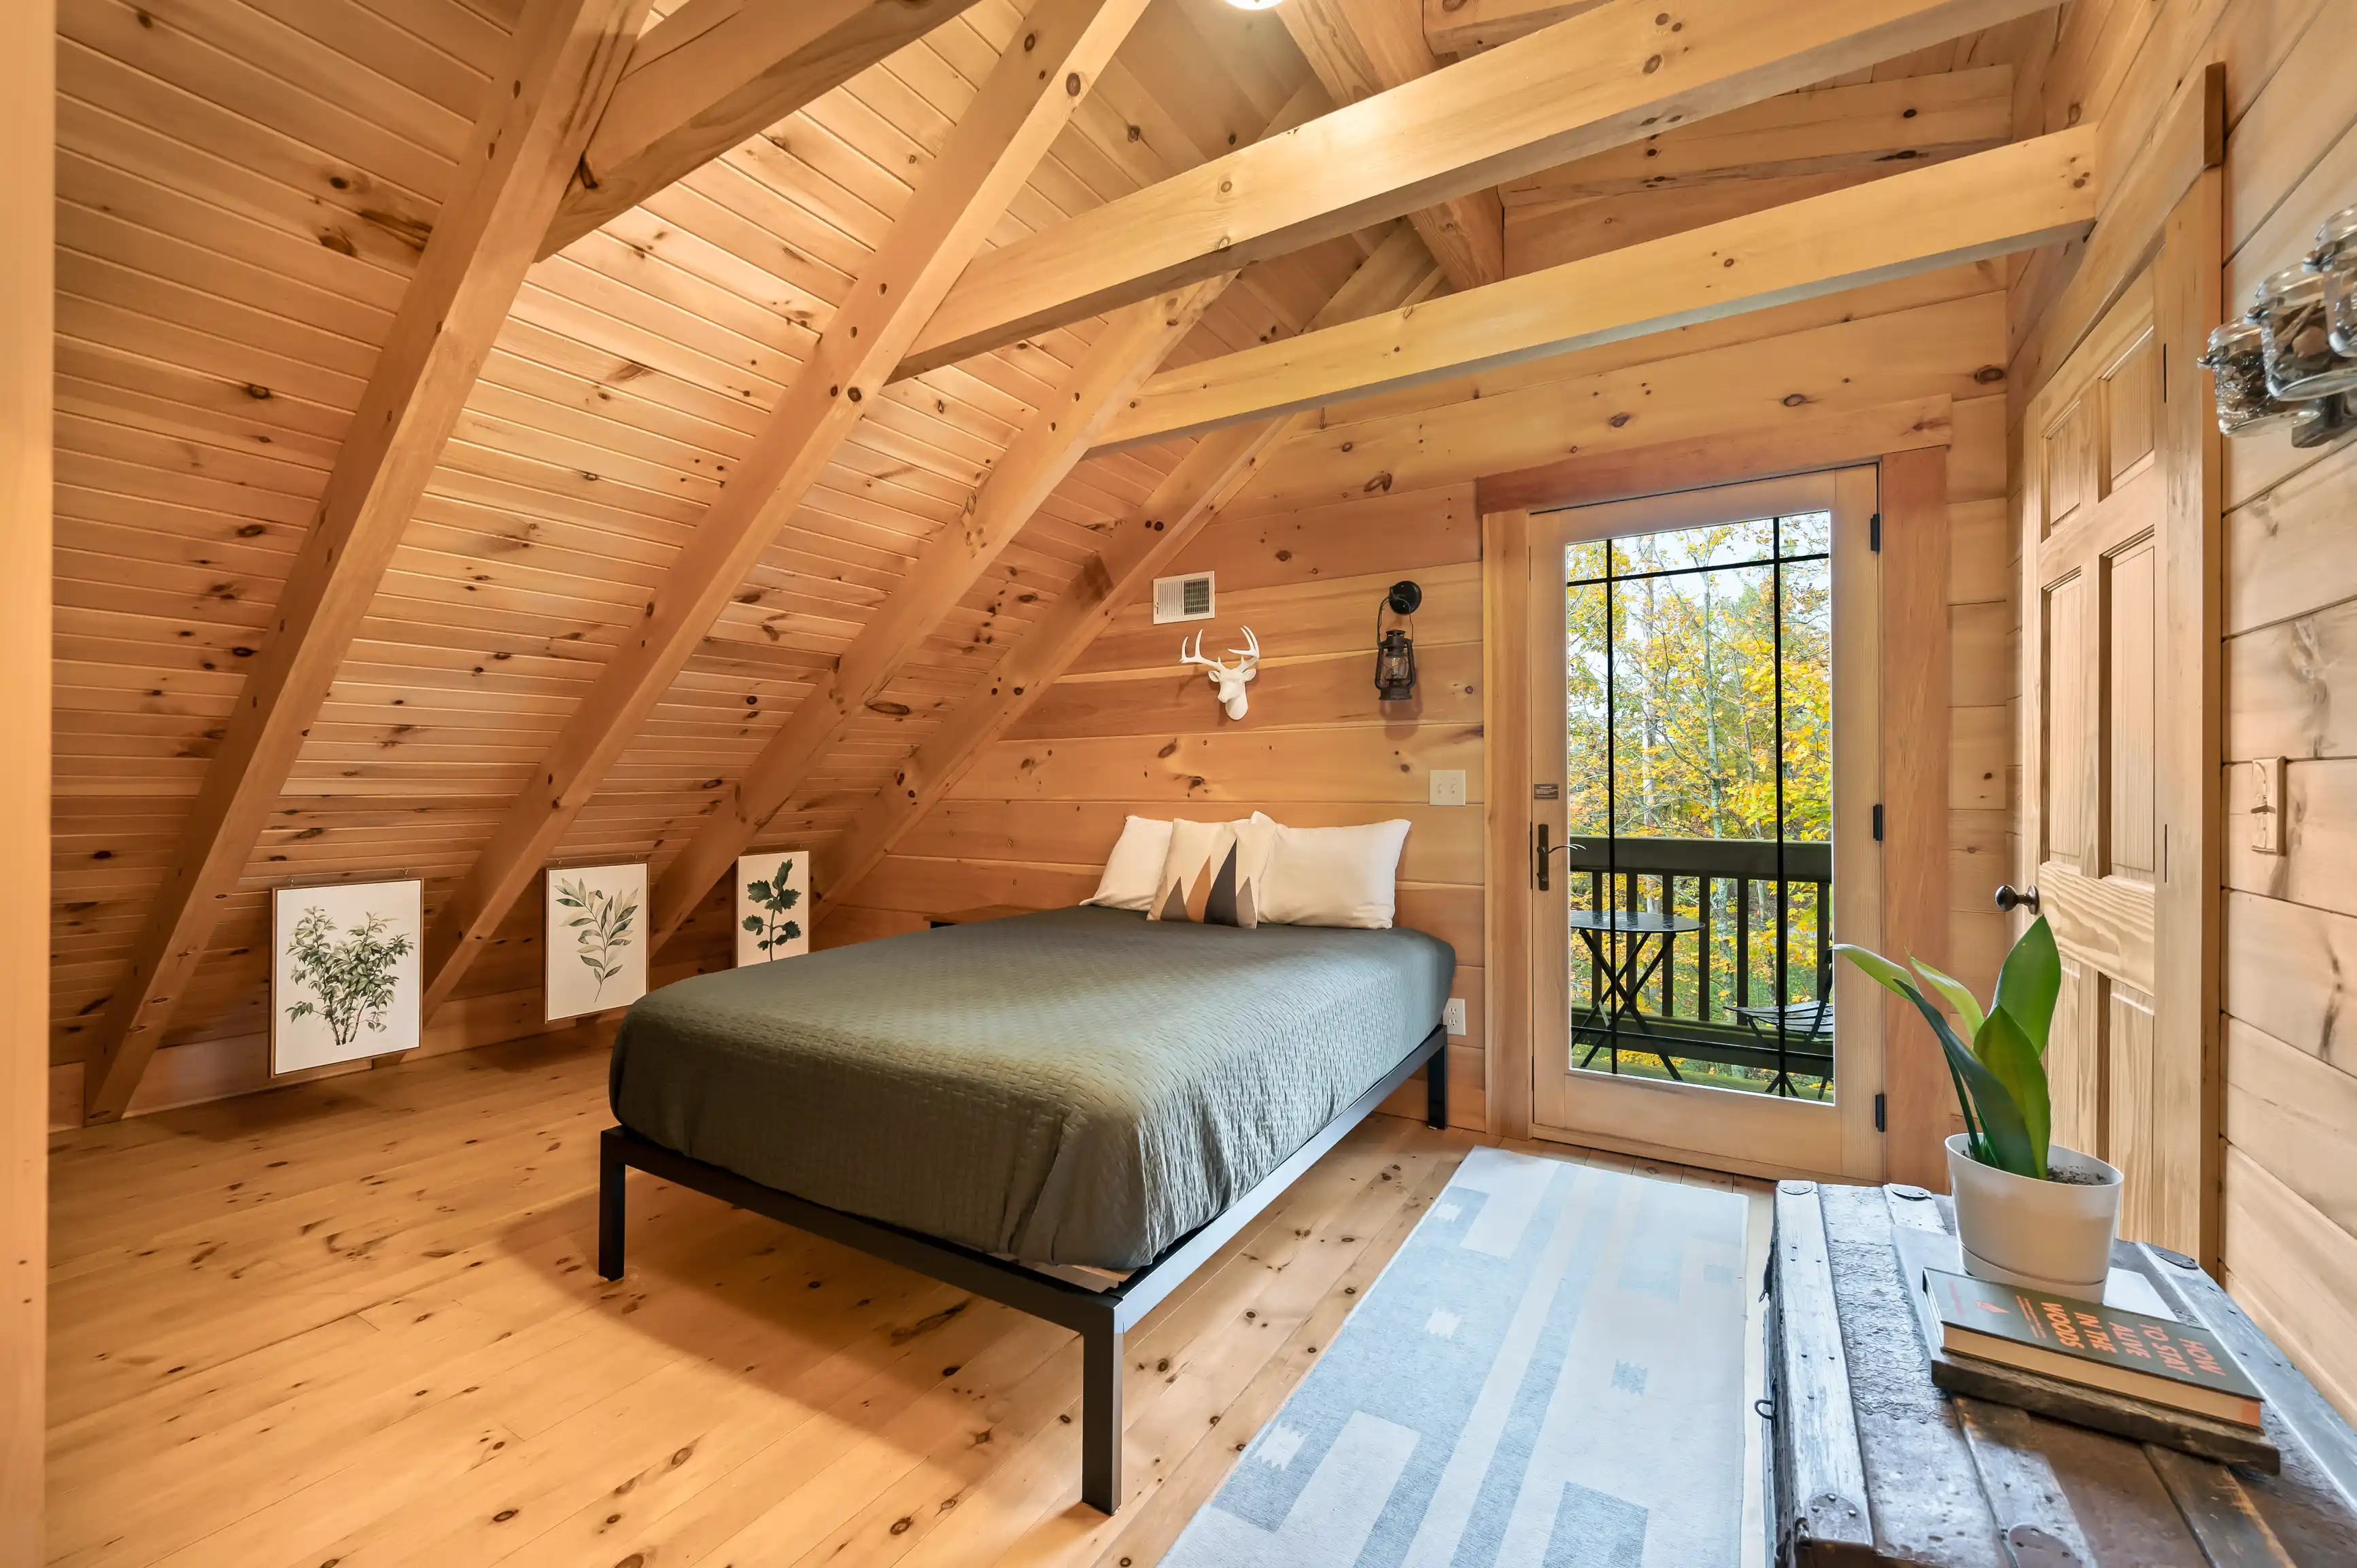 A cozy wooden cabin bedroom with a slanted ceiling, a double bed, white bedding, framed botanical art on the walls, and a balcony with a forest view visible through the glass door.